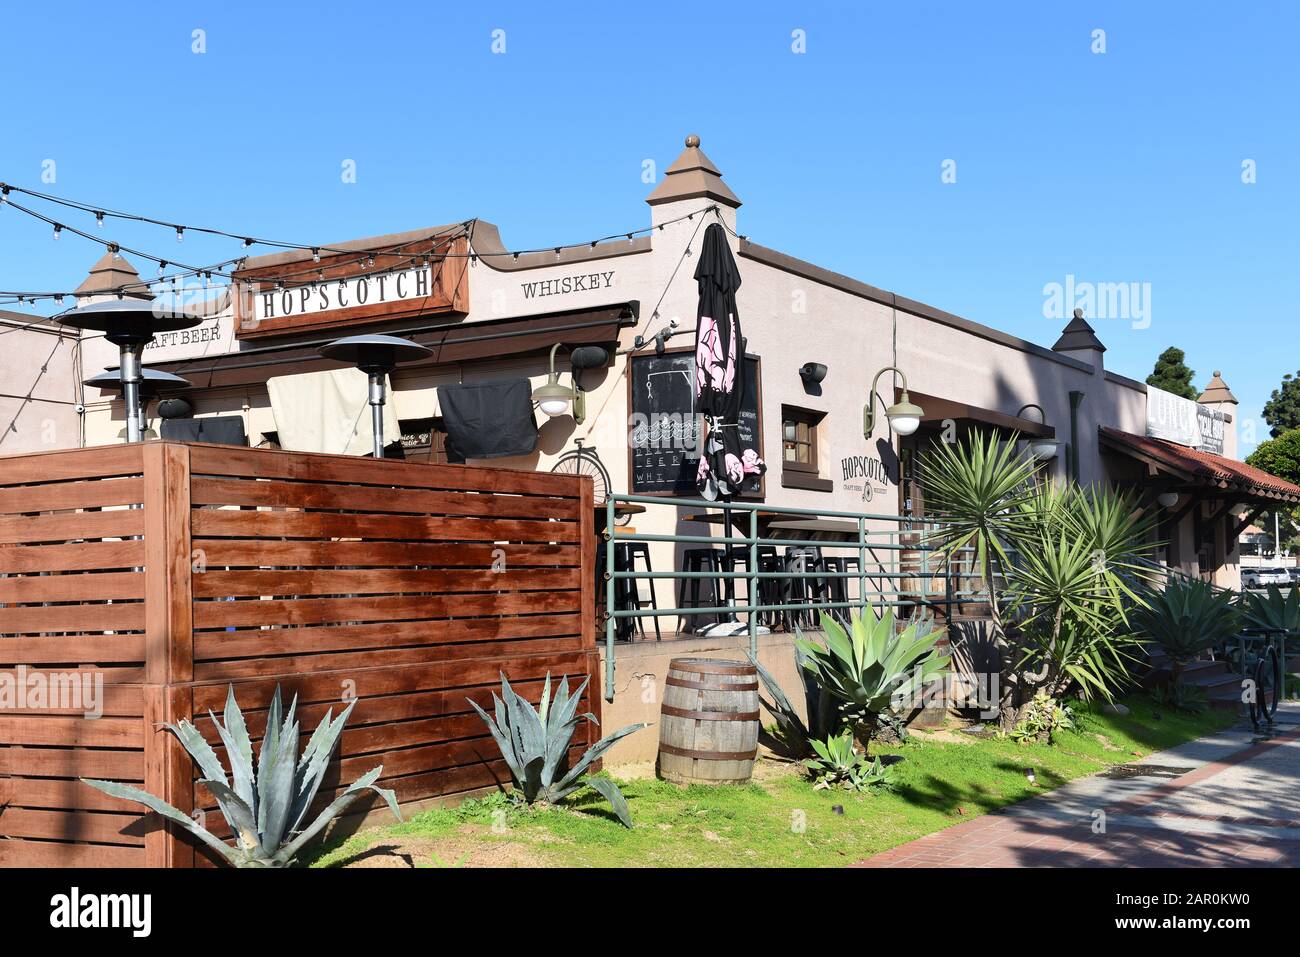 FULLERTON, CALIFORNIA - 24 JAN 2020: Hopscotch Tavern offers avariety of microbrews and whiskeys with hearty American fare in an old train depot. Stock Photo